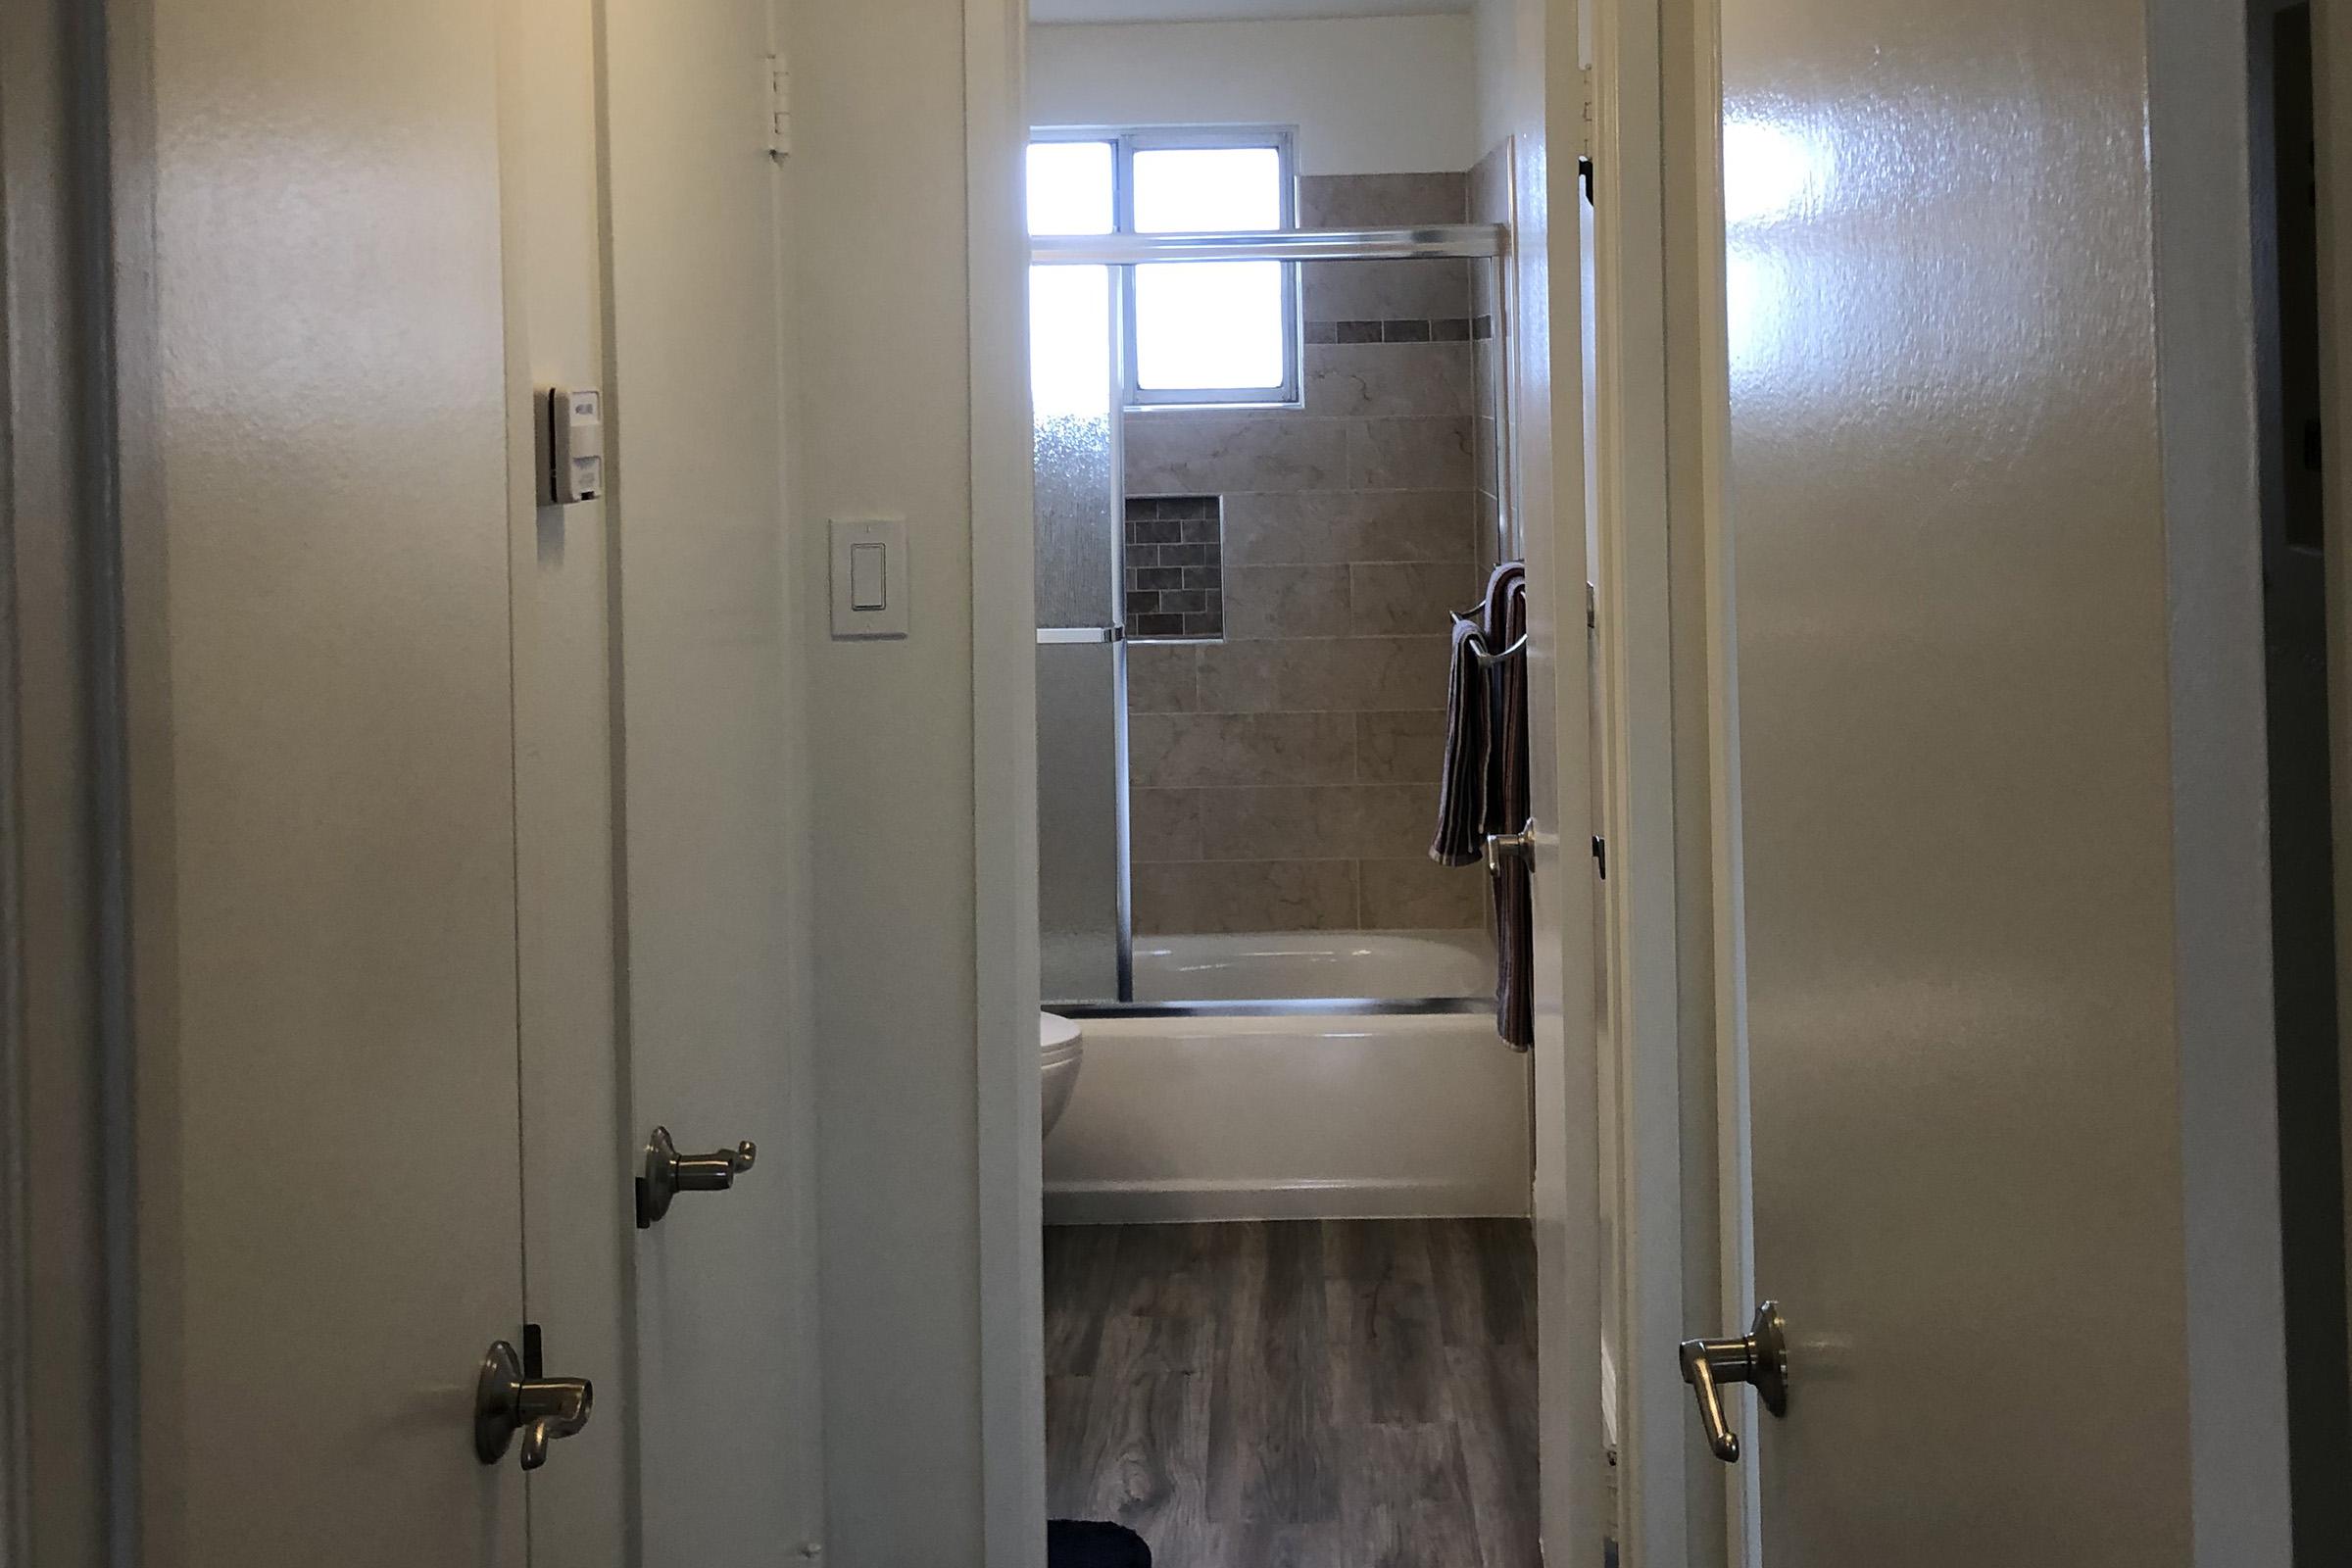 a view of the shower and sink